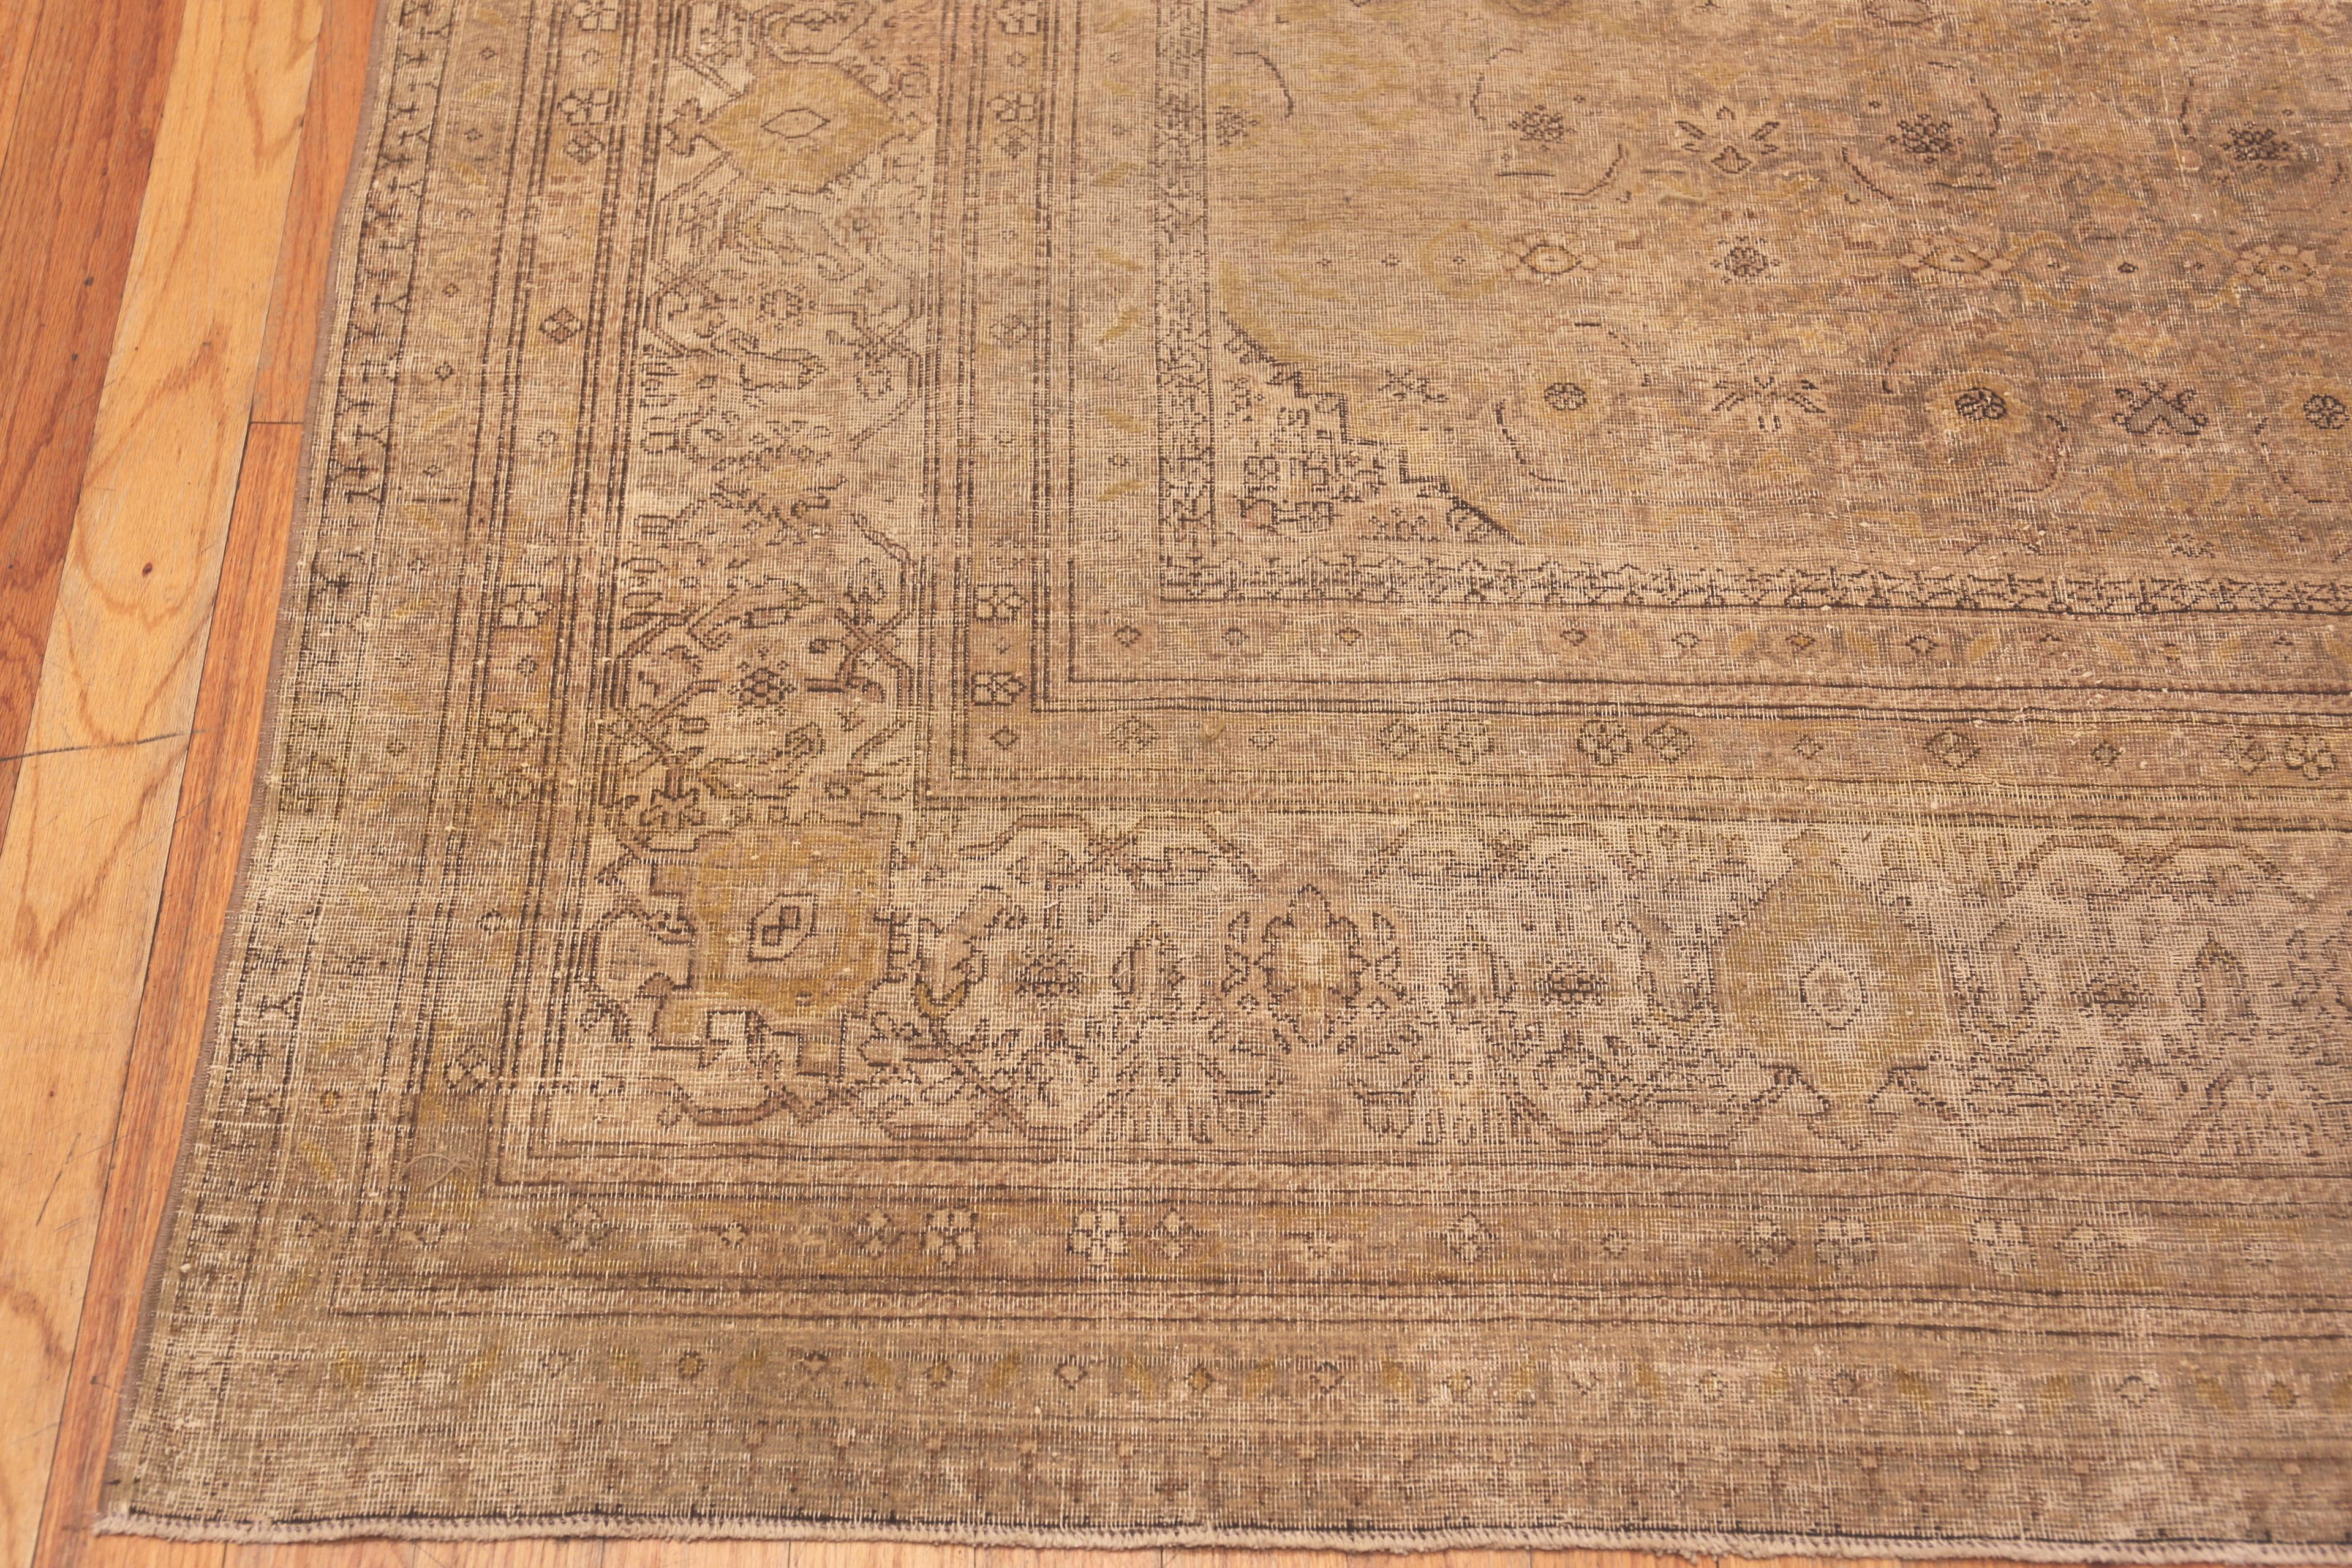 20th Century Nazmiyal Collection Antique Persian Tabriz Rug. 12 ft 3 in x 15 ft 8 in